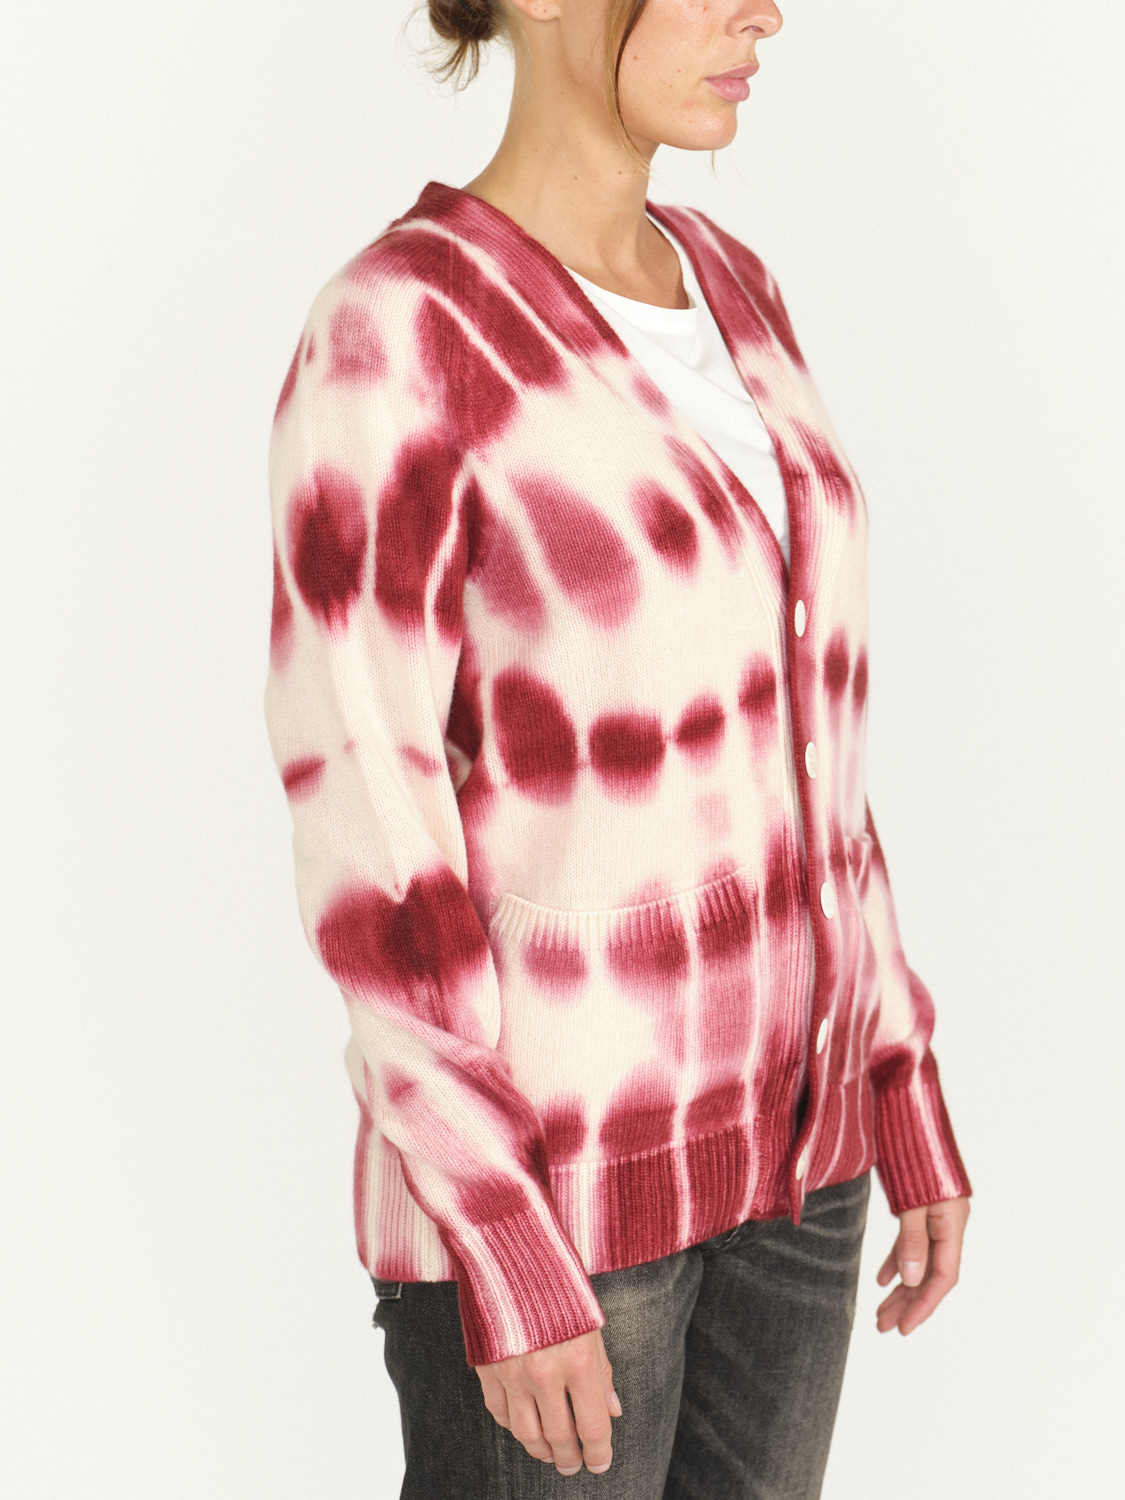 The Elder Statesman Isd Relaxed - Batik pattern cardigan is made of cashmere red S